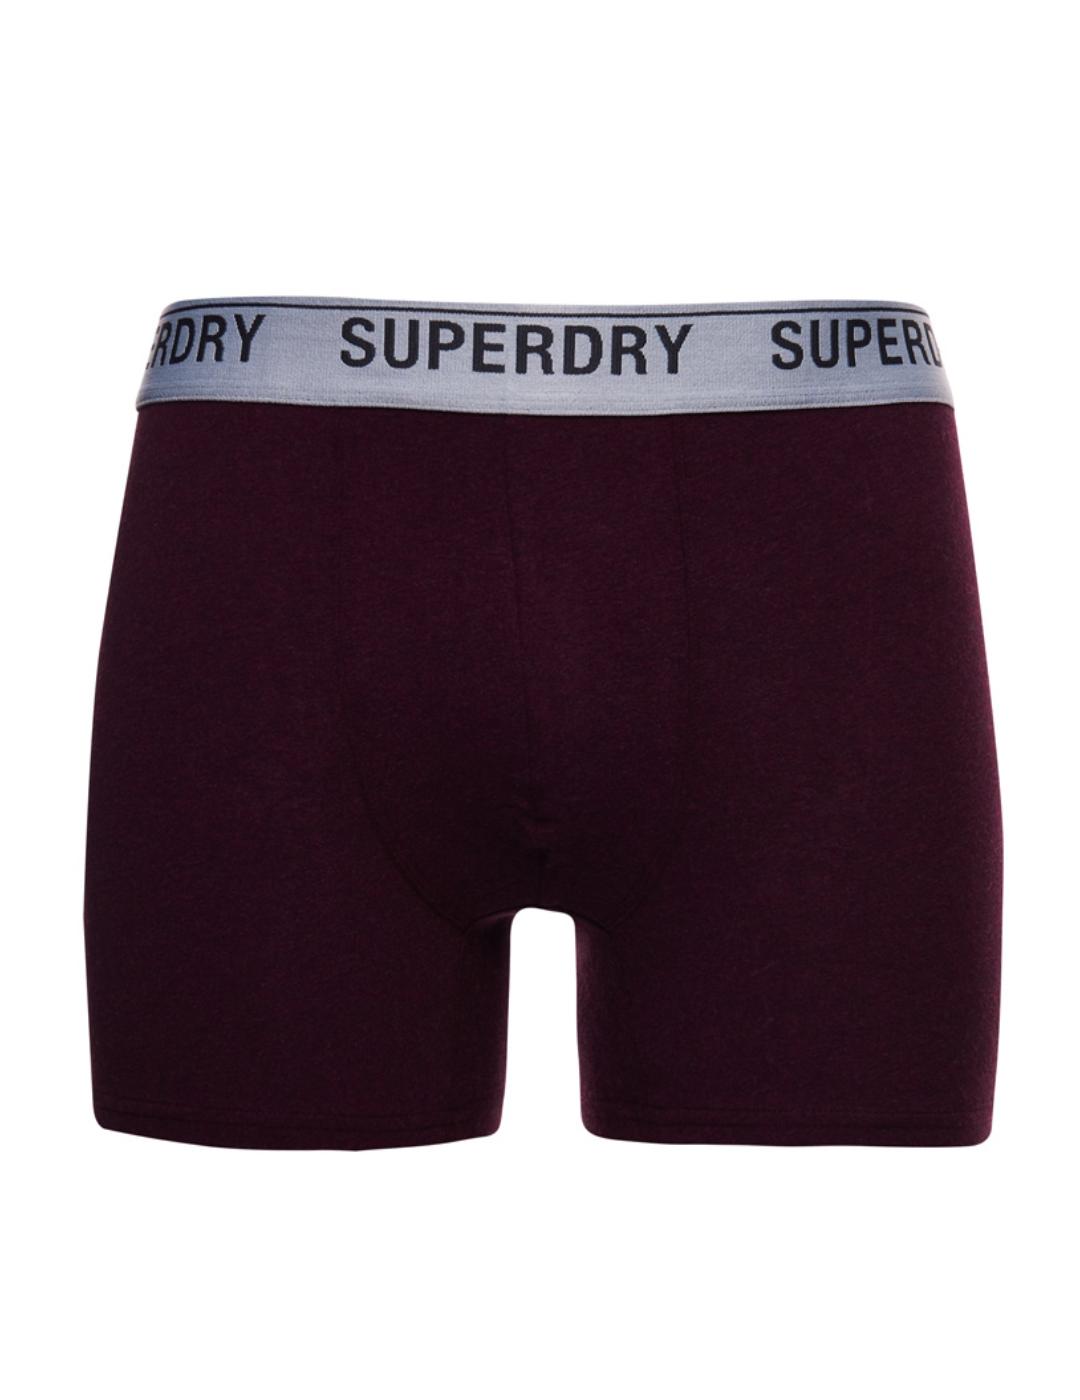 Intimo Superdry pack3 boxer Burgundy hombre-a